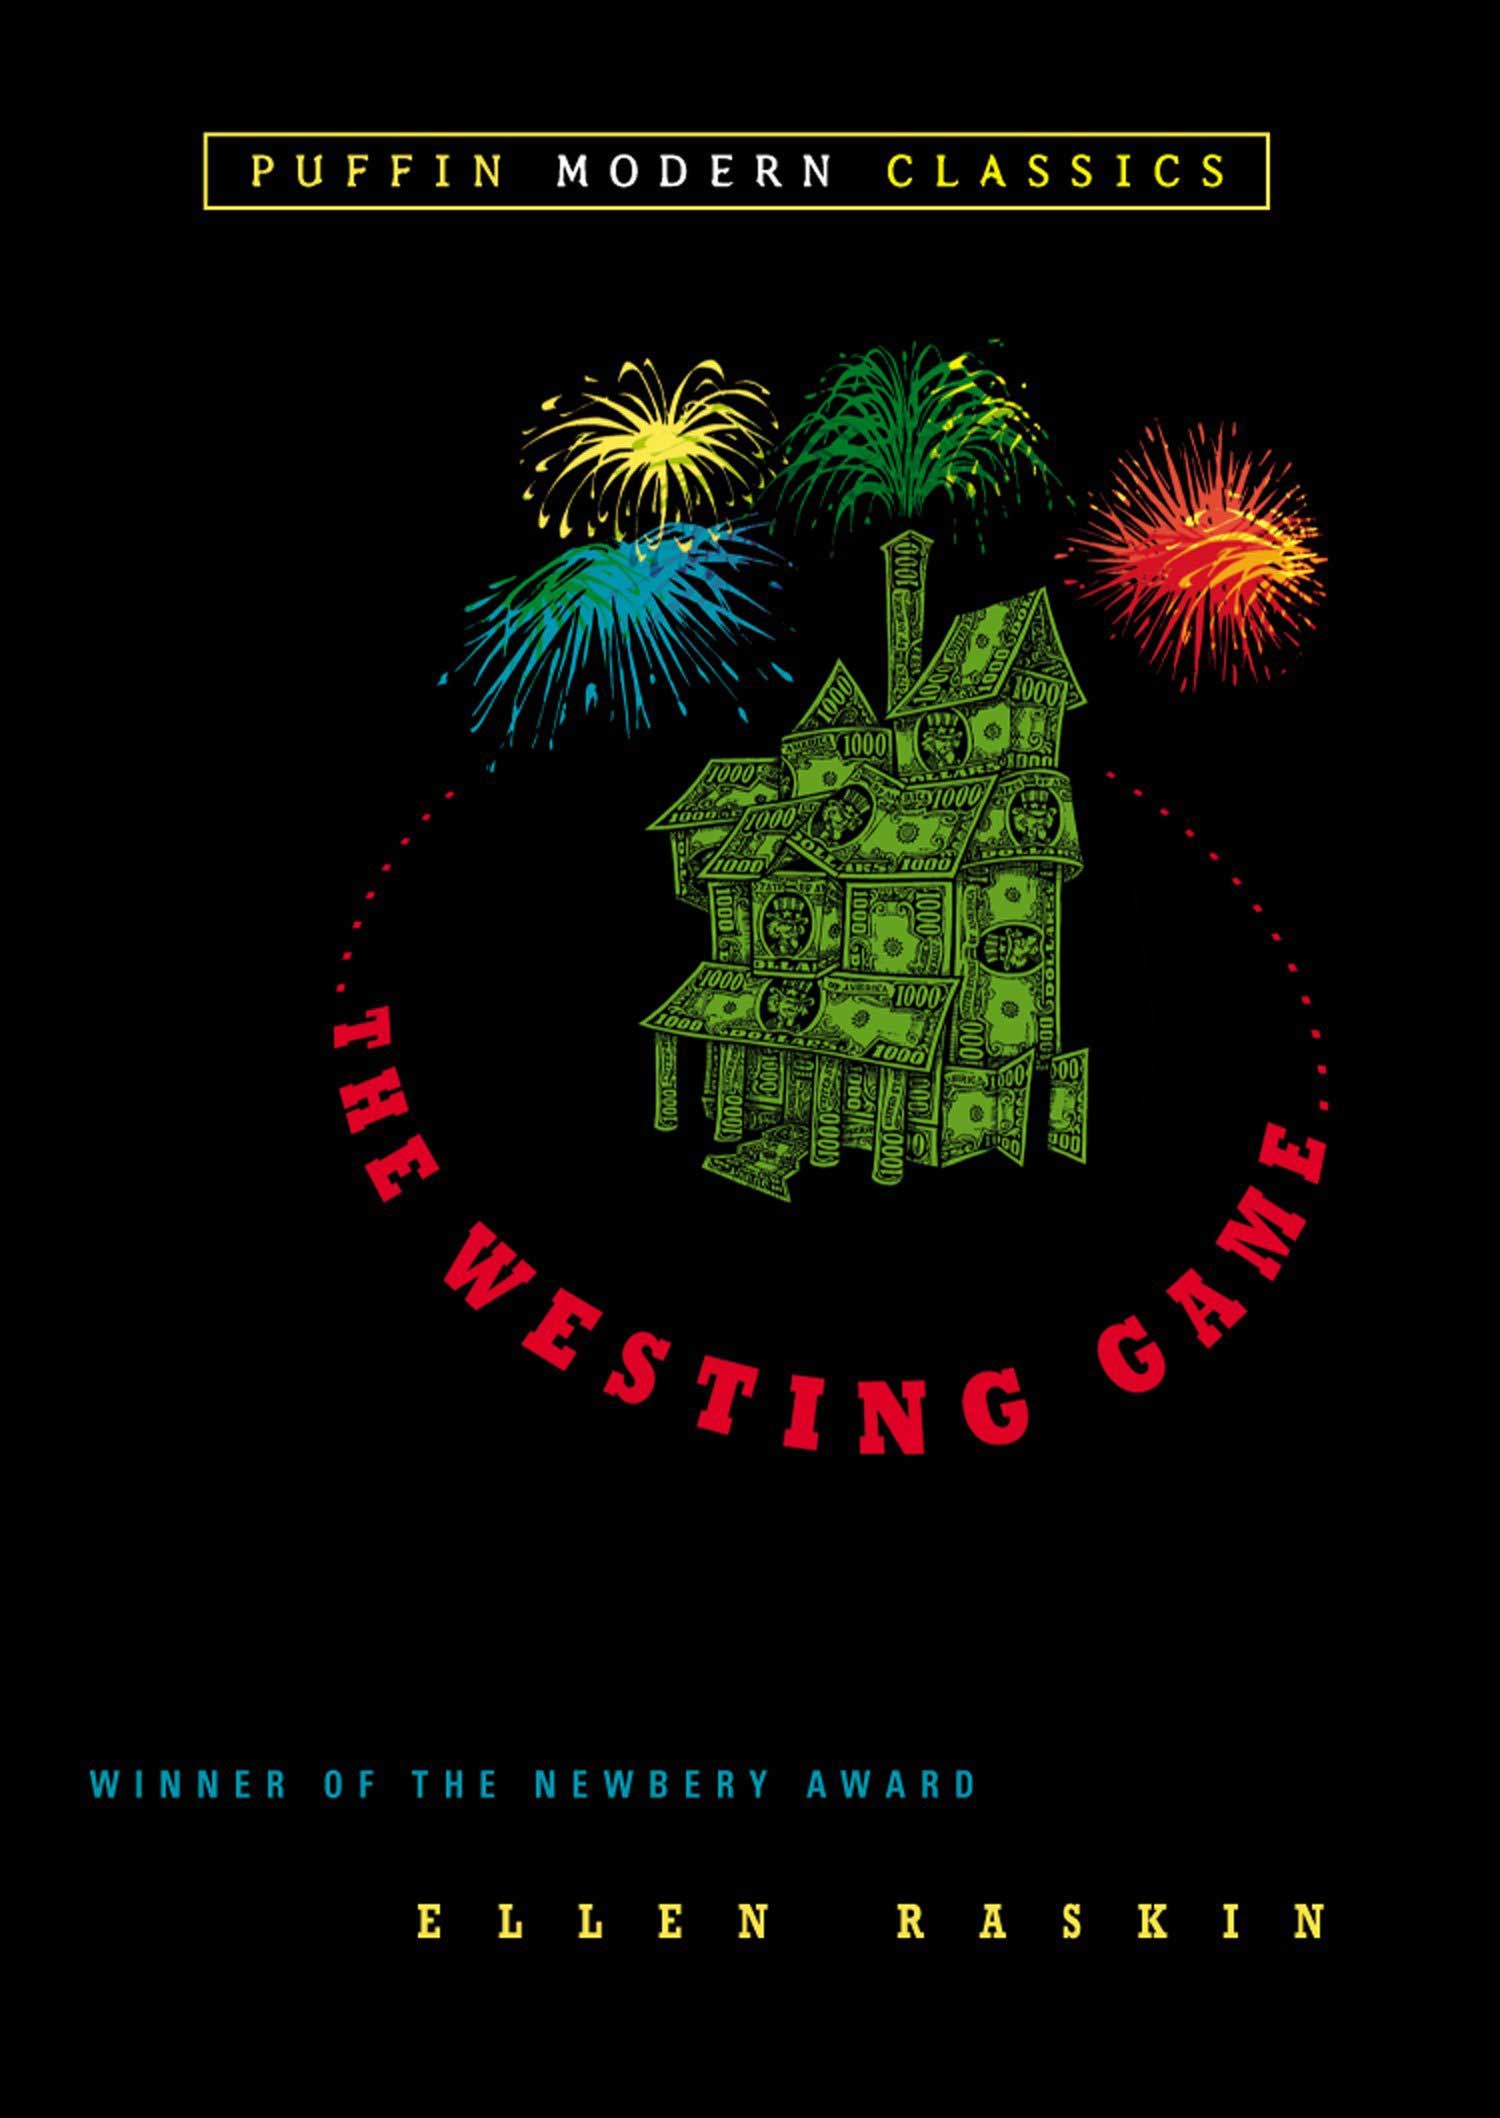 The Westing Game, by Ellen Raskin.
                              
                              
                              
                              In his will, the millionaire Sam Westing challenges 16 heirs to solve the mystery of who murdered him.
                              
                              
                              
                              Buy now: The Westing Game